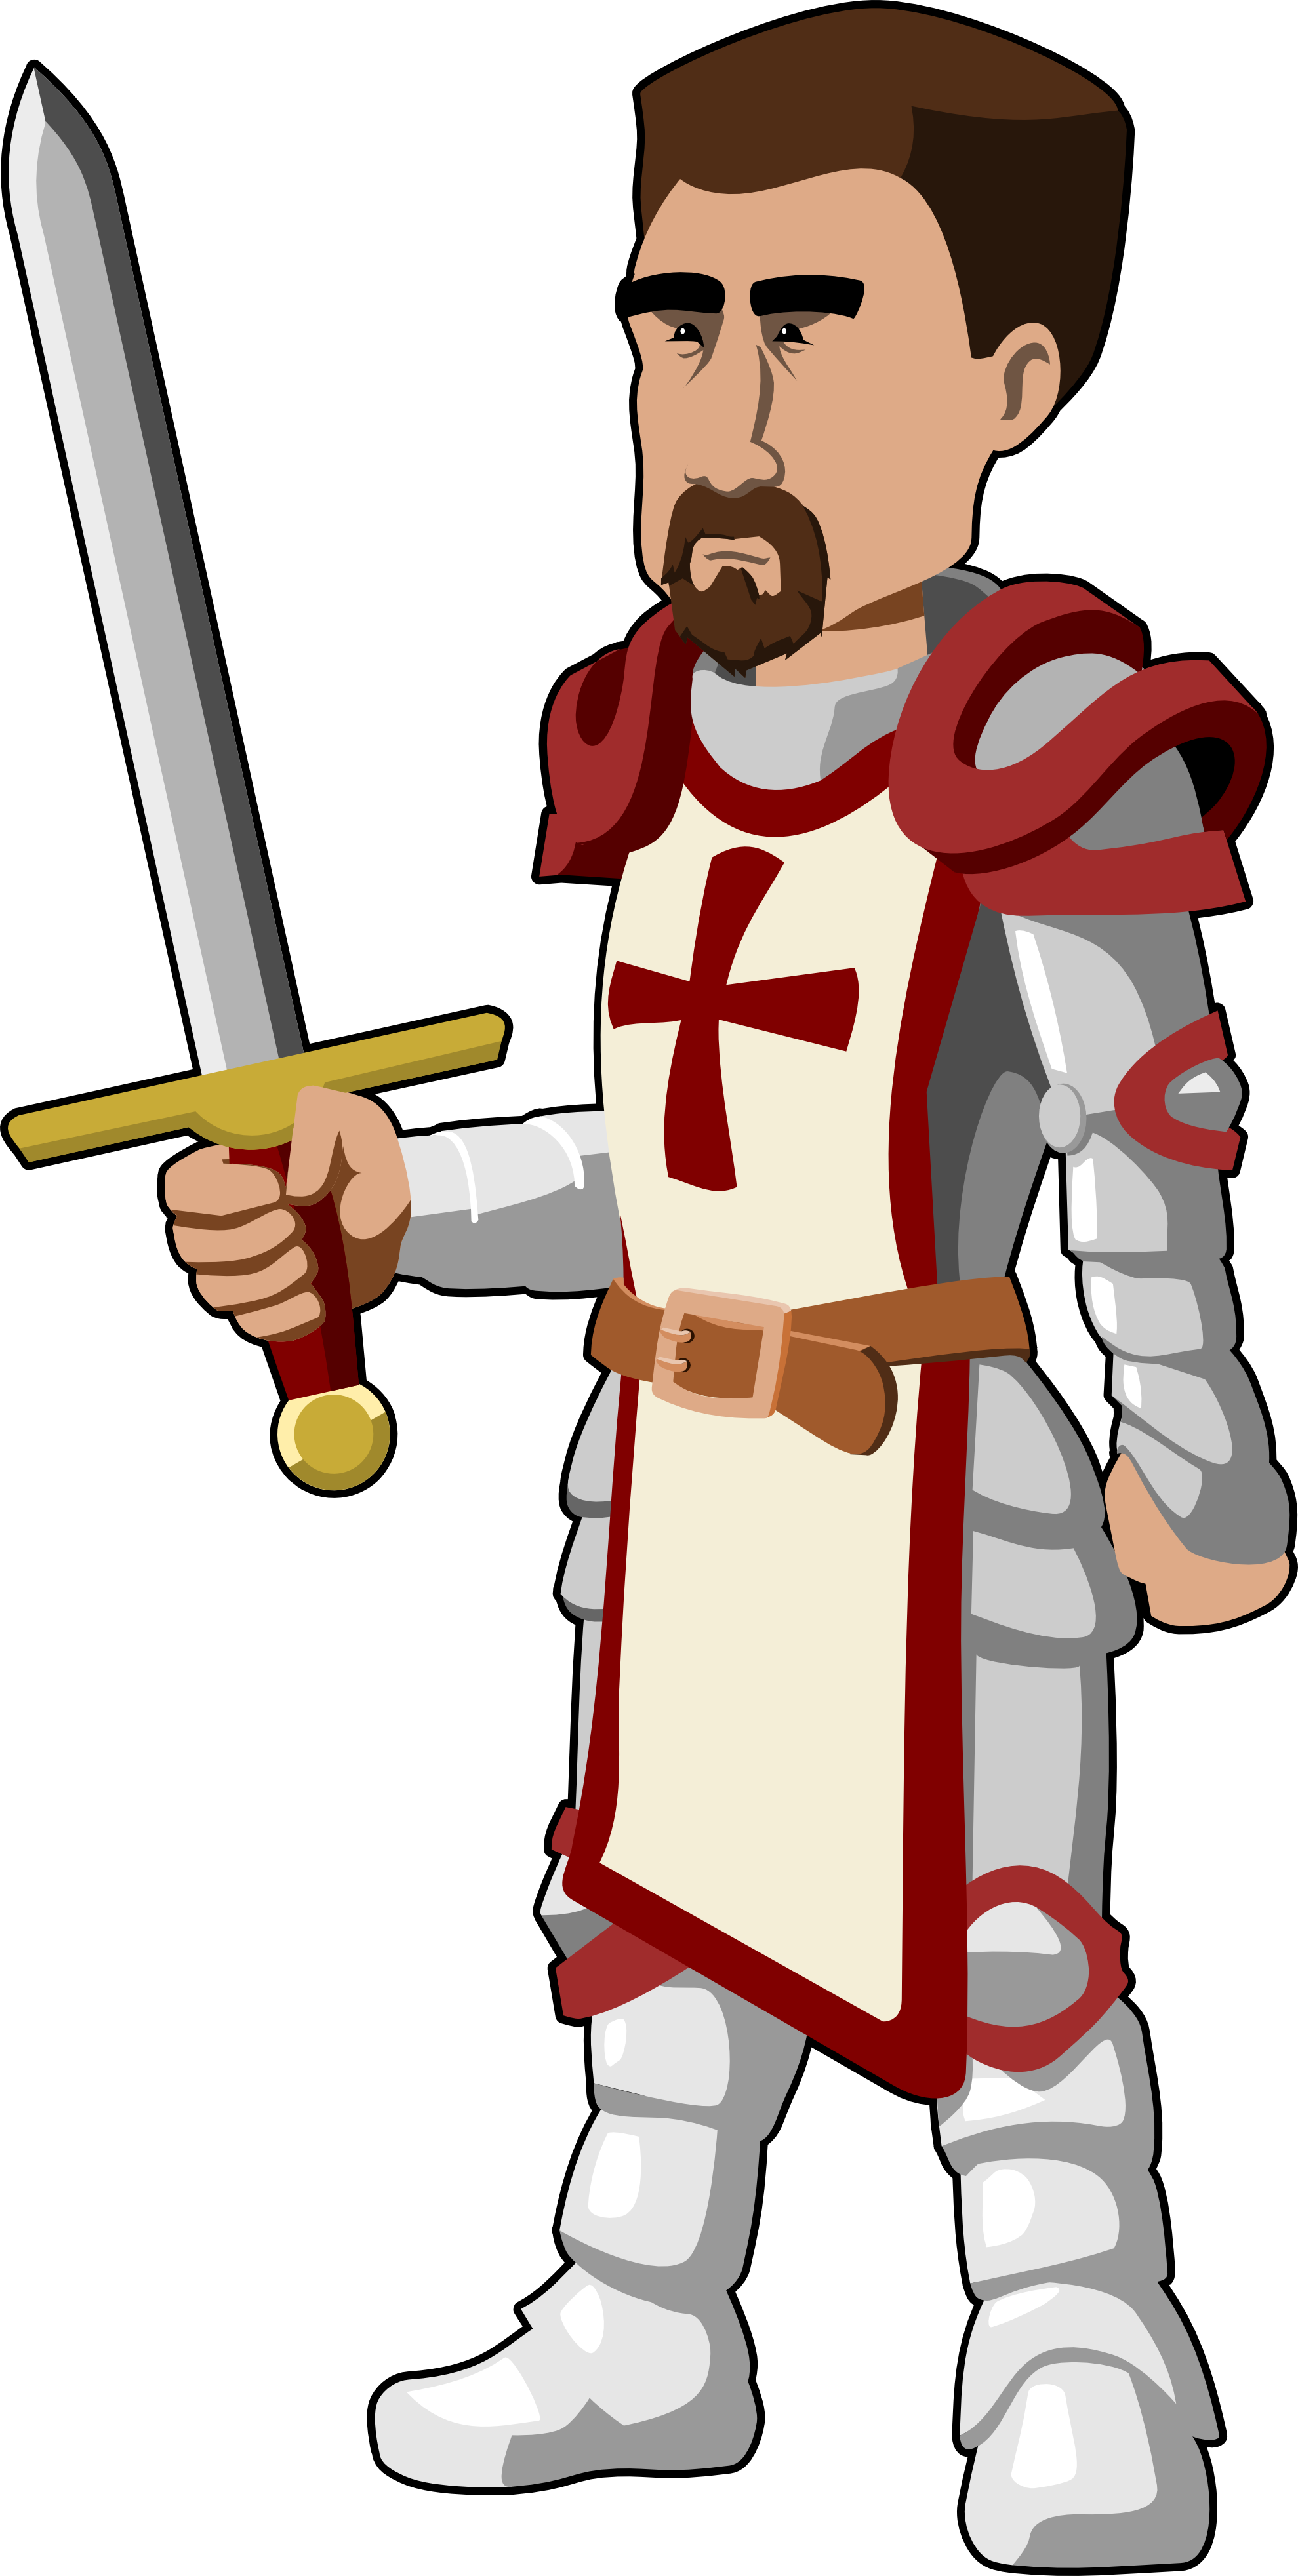 Lord free cliparts download. Medieval clipart couple